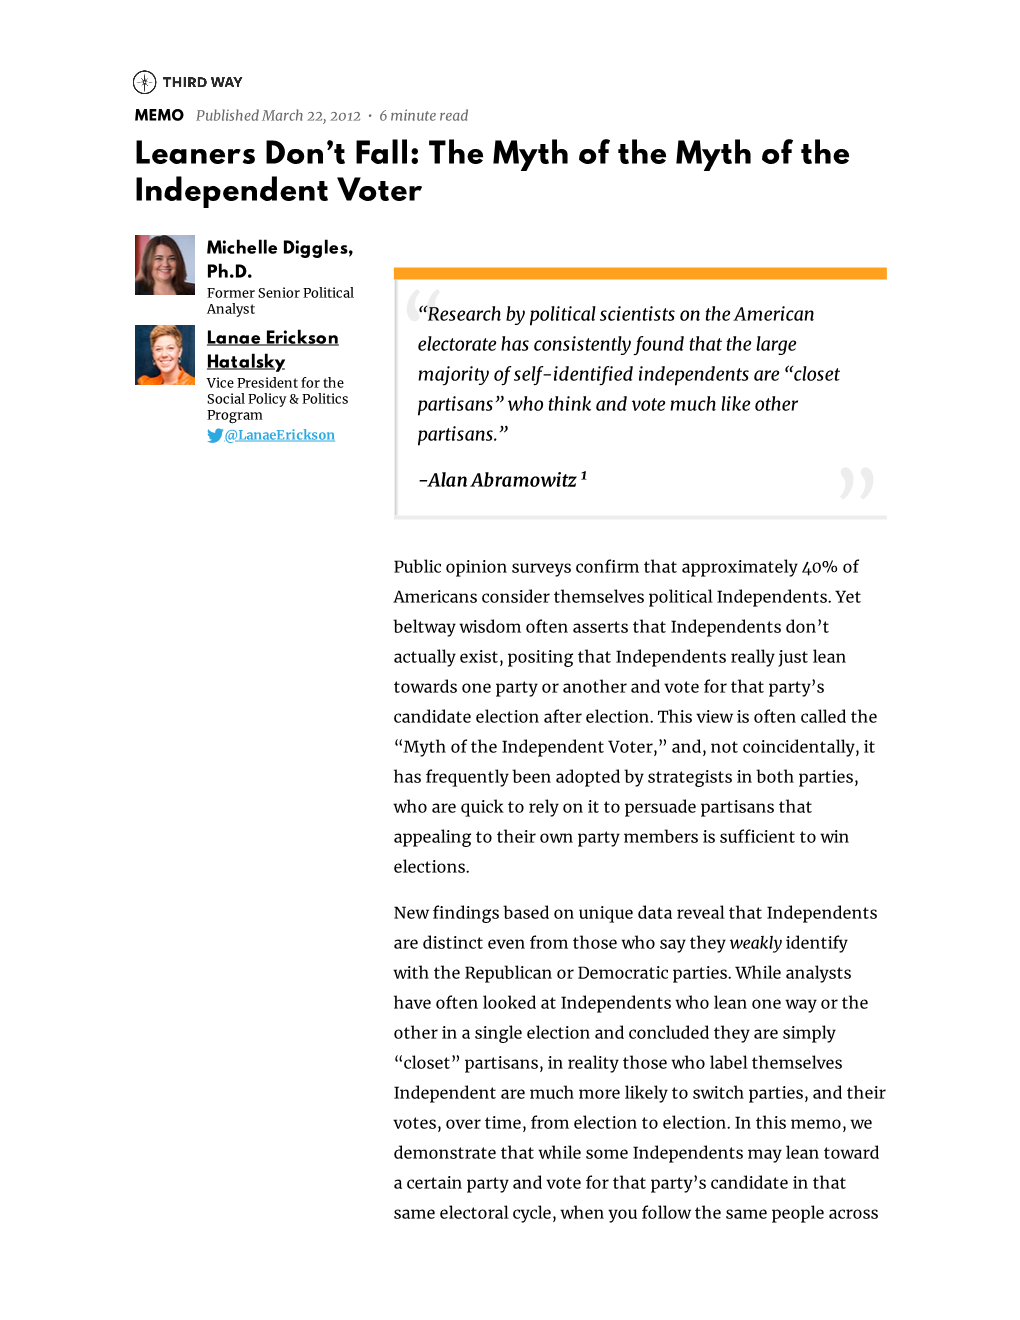 Leaners Don't Fall: the Myth of the Myth of the Independent Voter